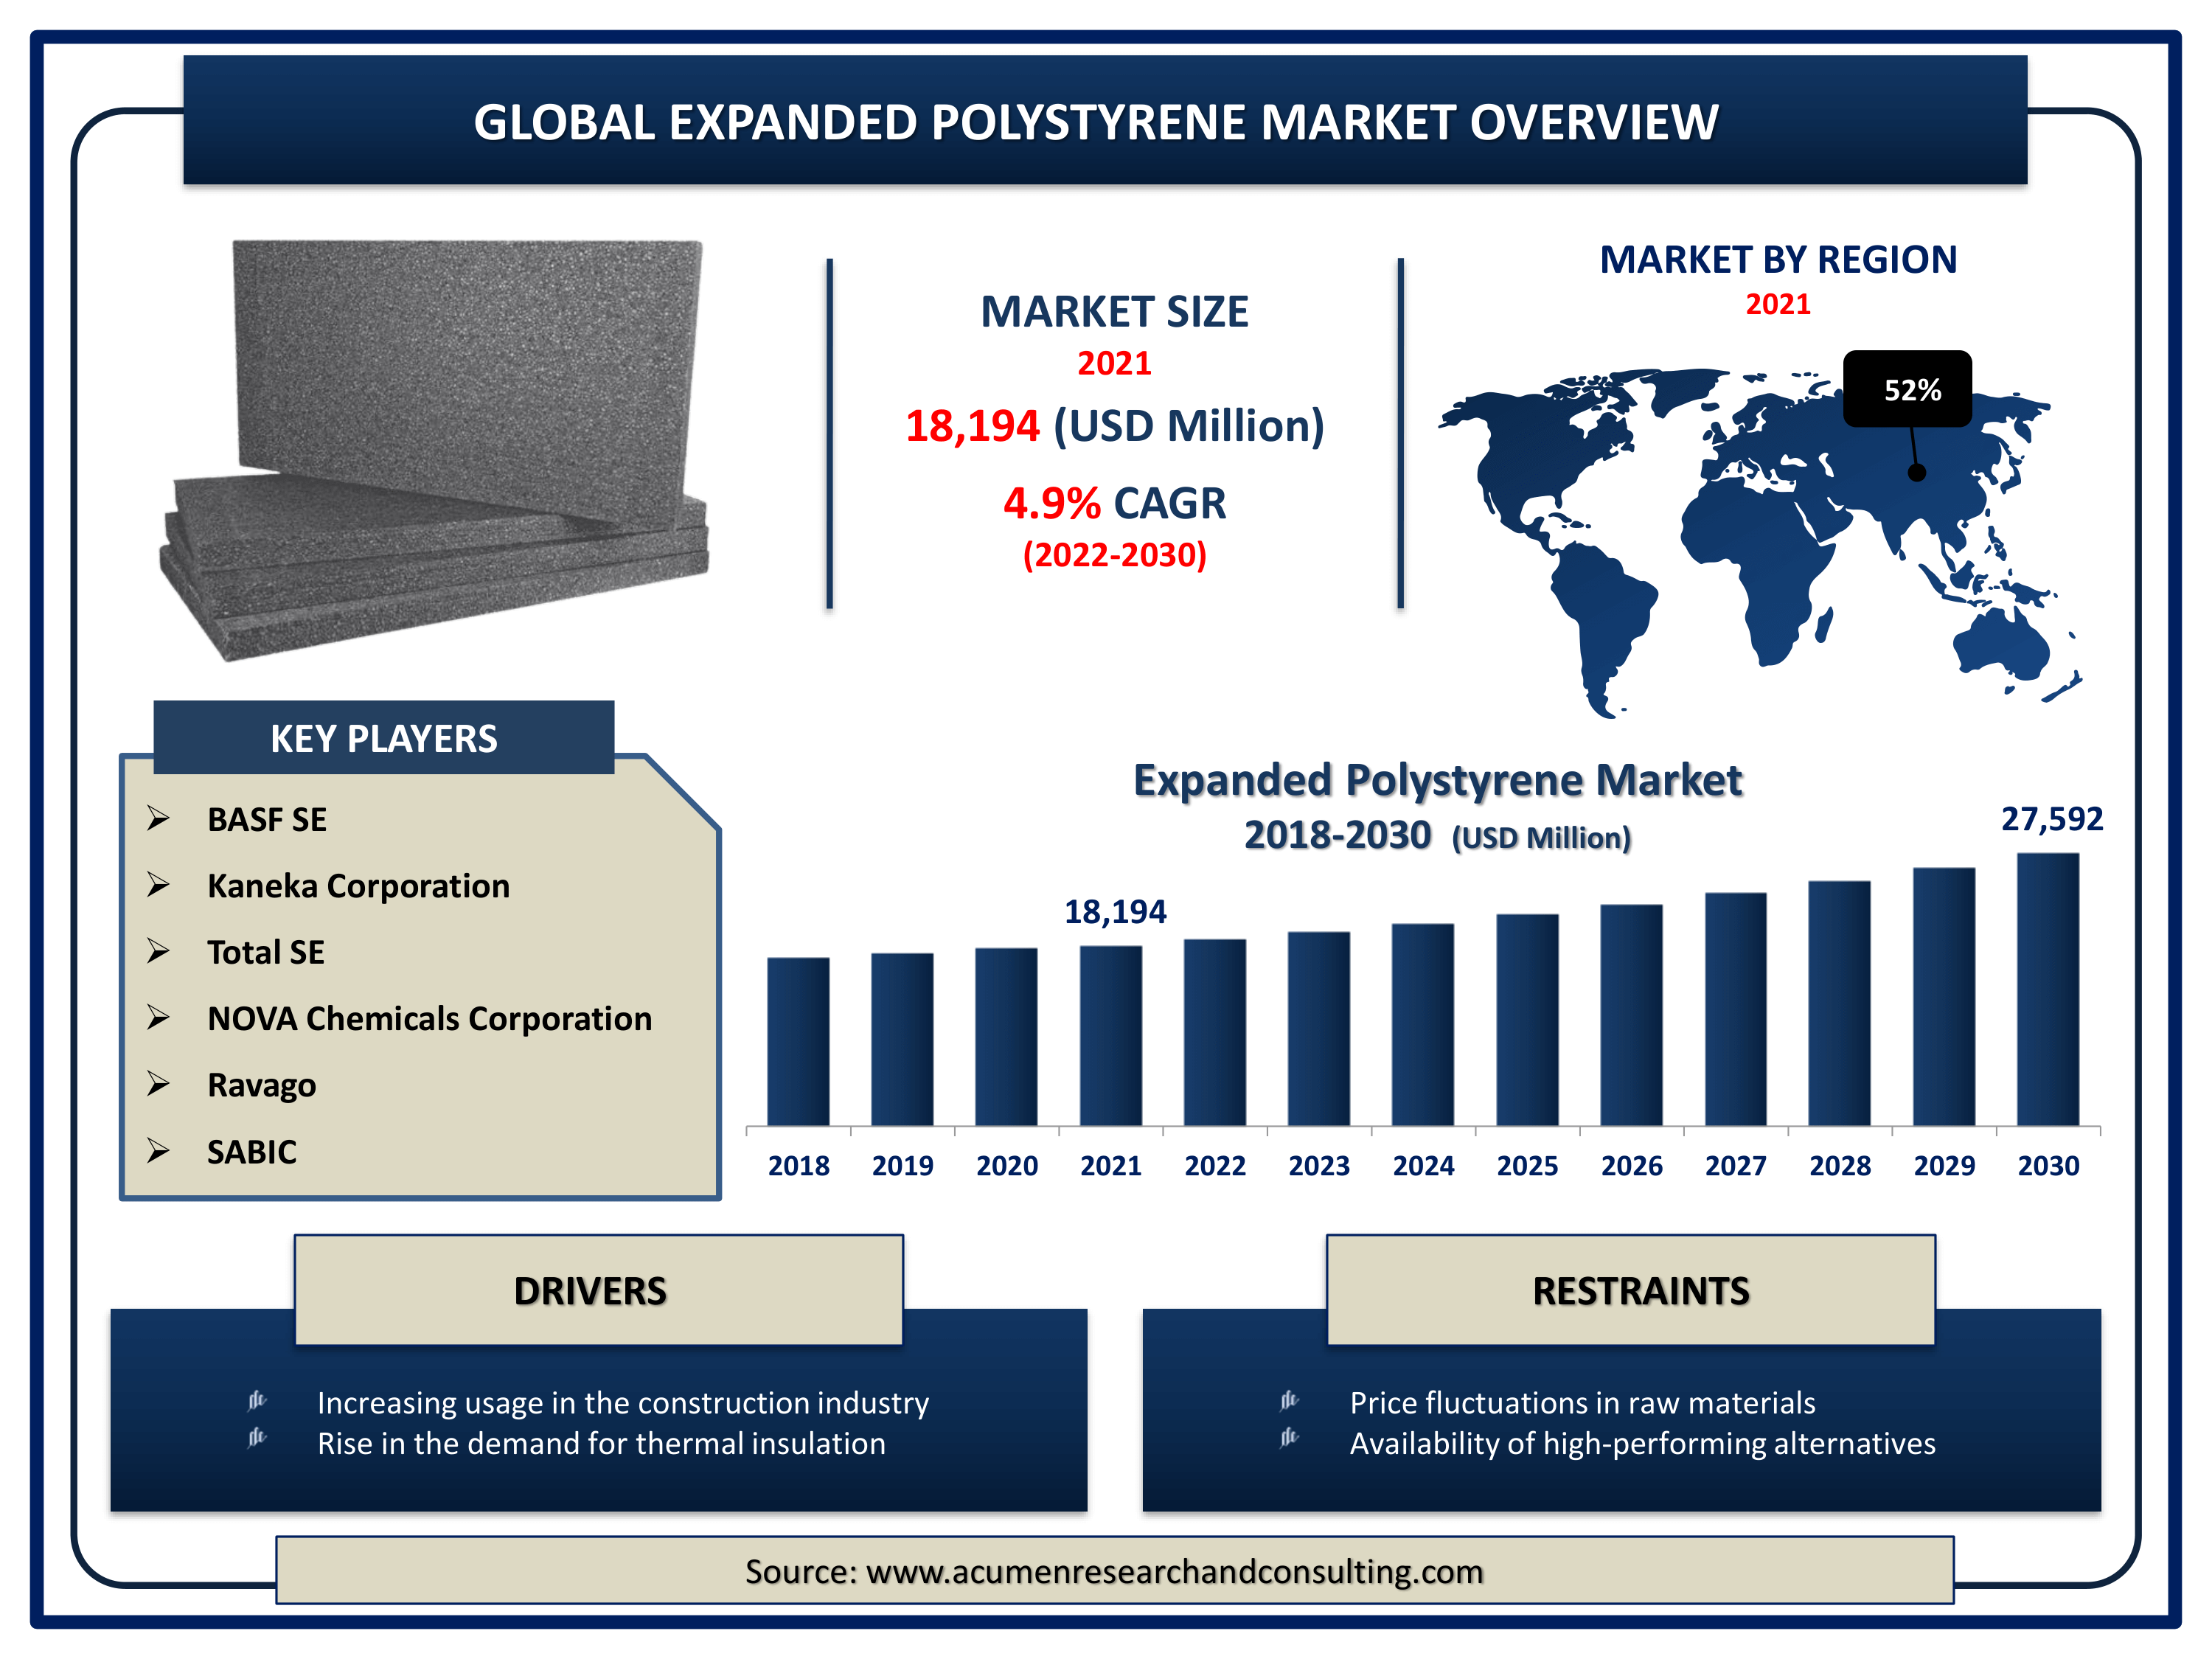 Global expanded polystyrene market revenue is estimated to expand by USD 27,592 million by 2030, with a 4.9% CAGR from 2022 to 2030.